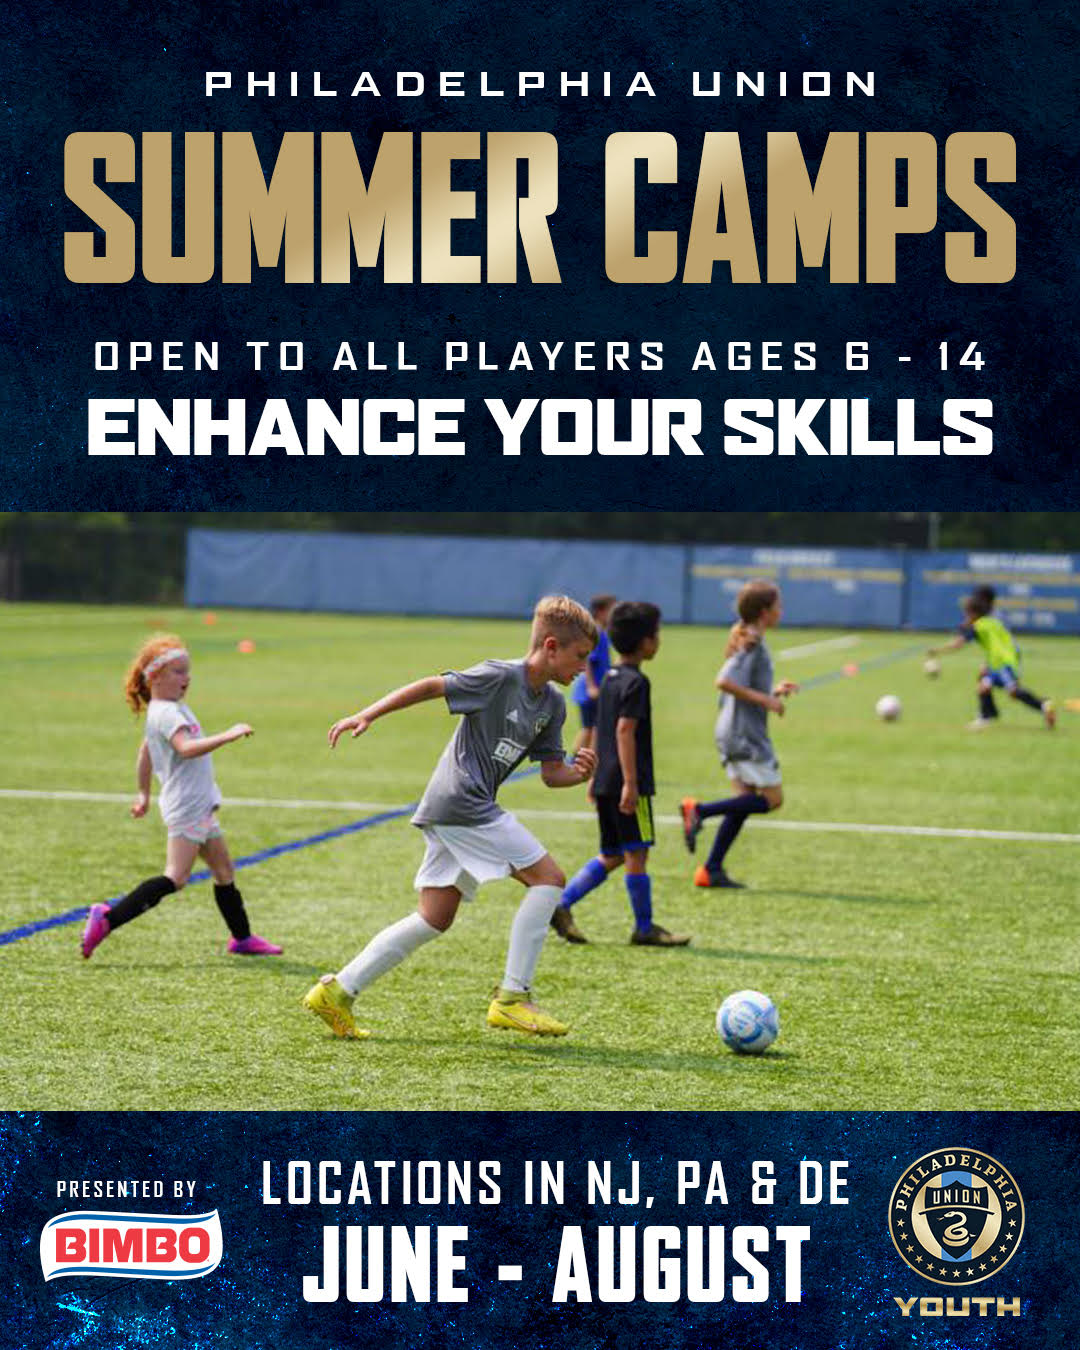 Philadelphia Union offers the best youth soccer summer camp.